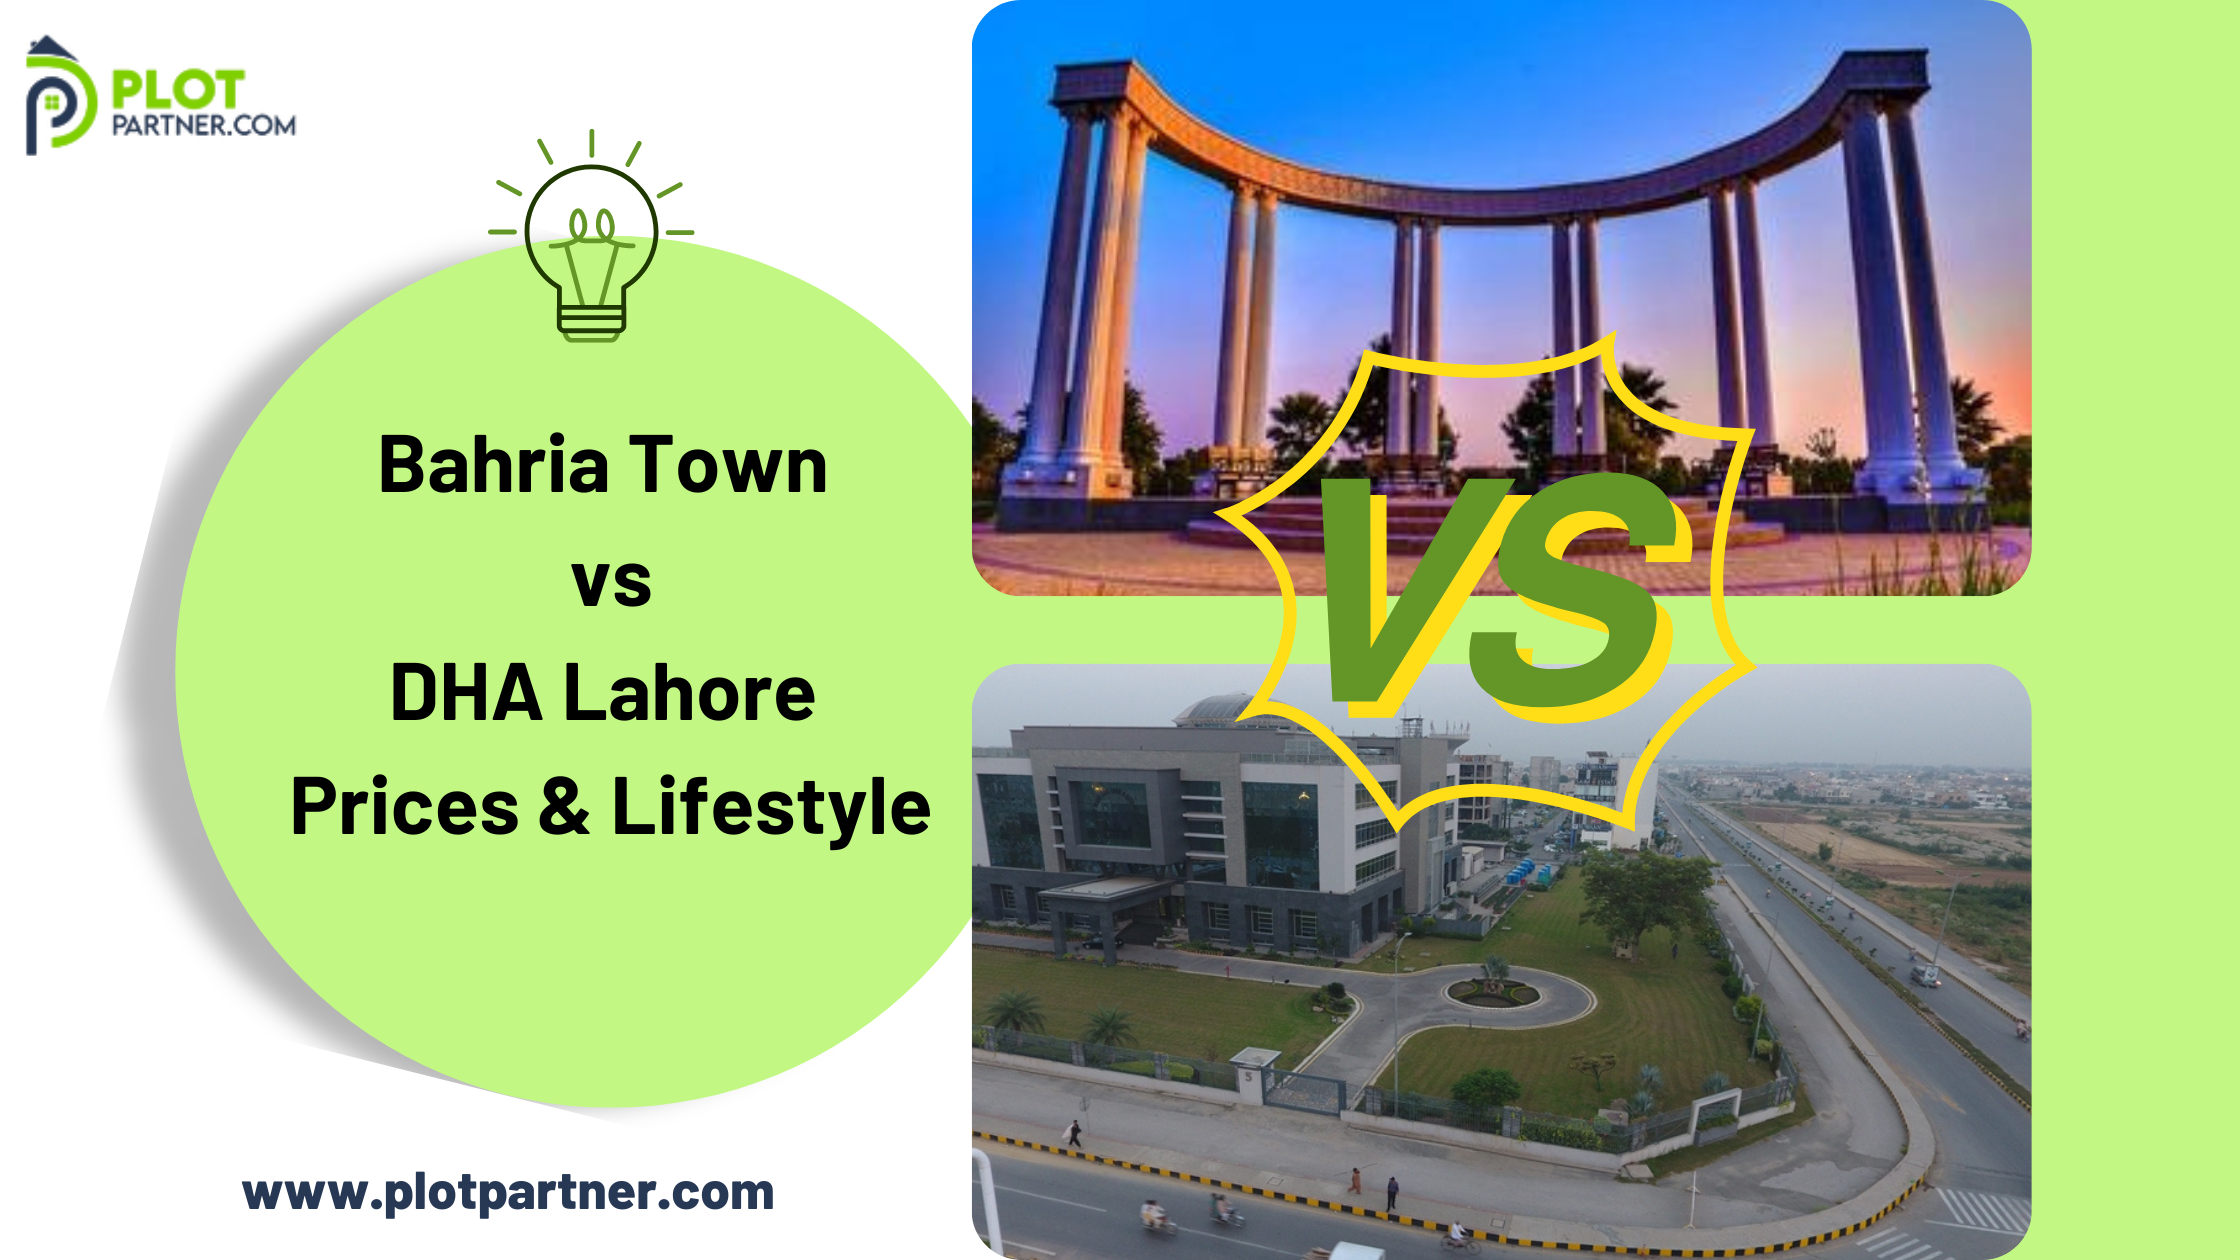 Bahria Town vs DHA Lahore: Property Prices, Lifestyle, and More